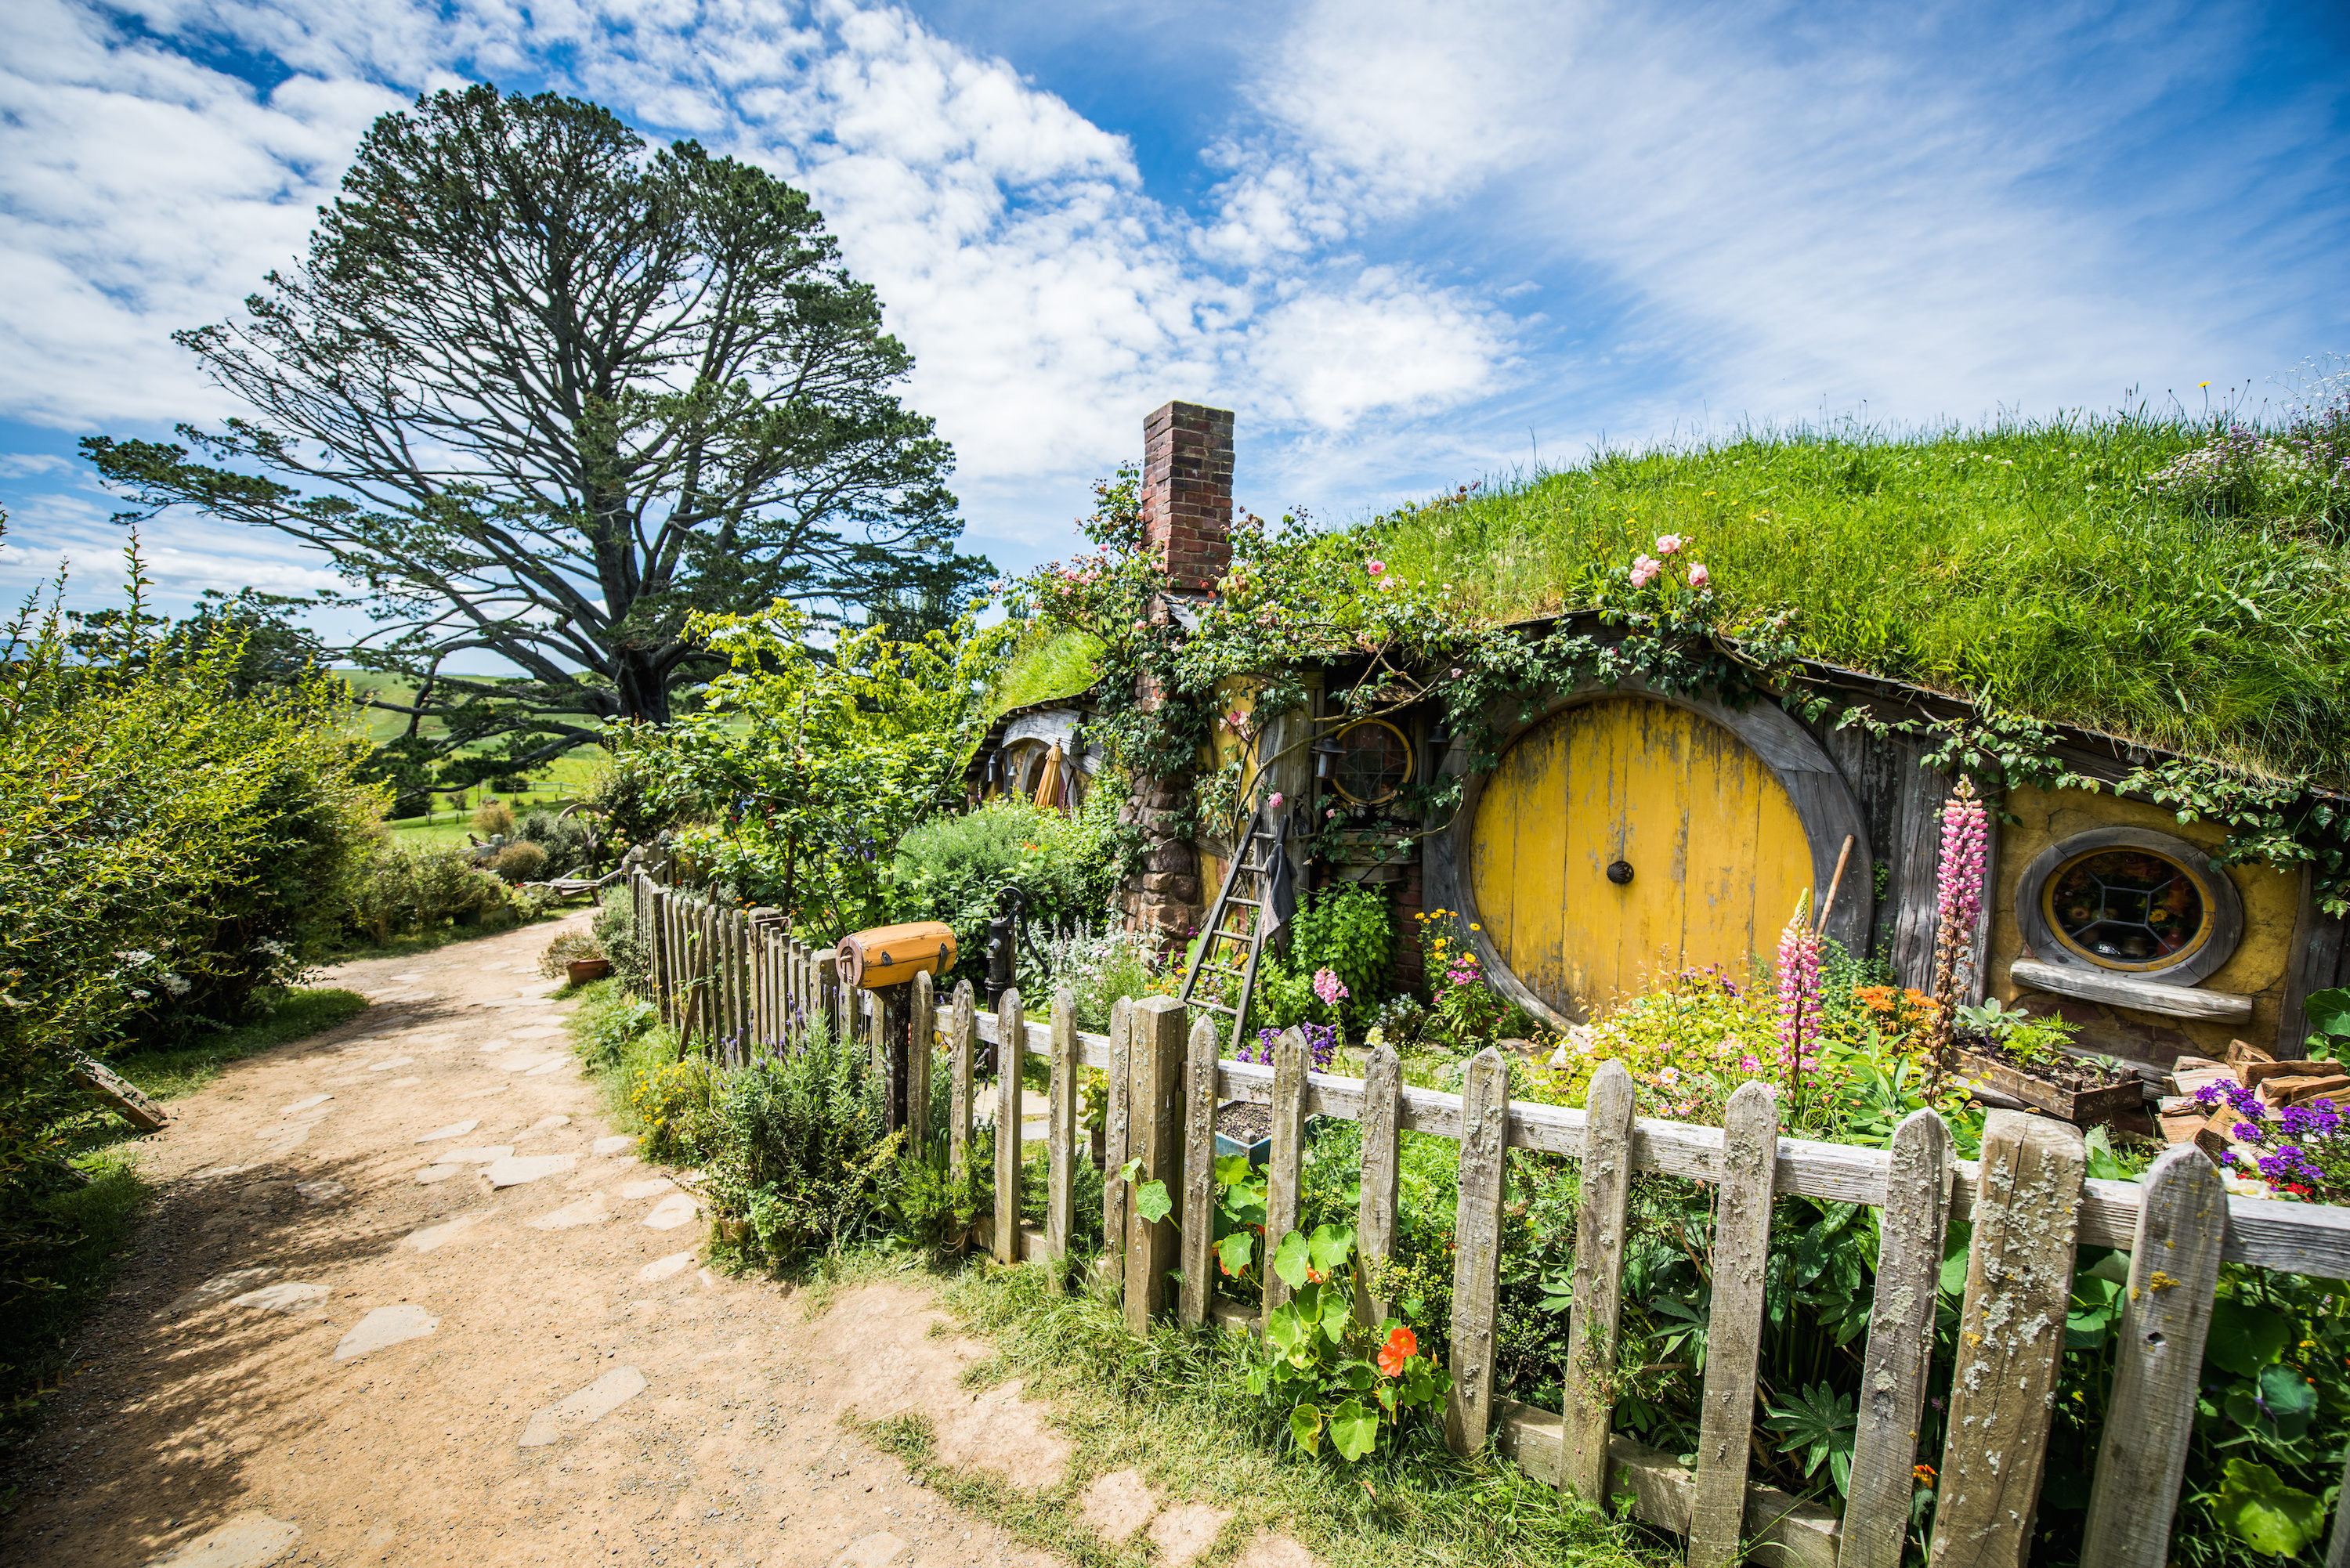 Hobbiton wallpapers, HQ pictures, 4K wallpapers, Stunning landscapes, 3000x2010 HD Desktop